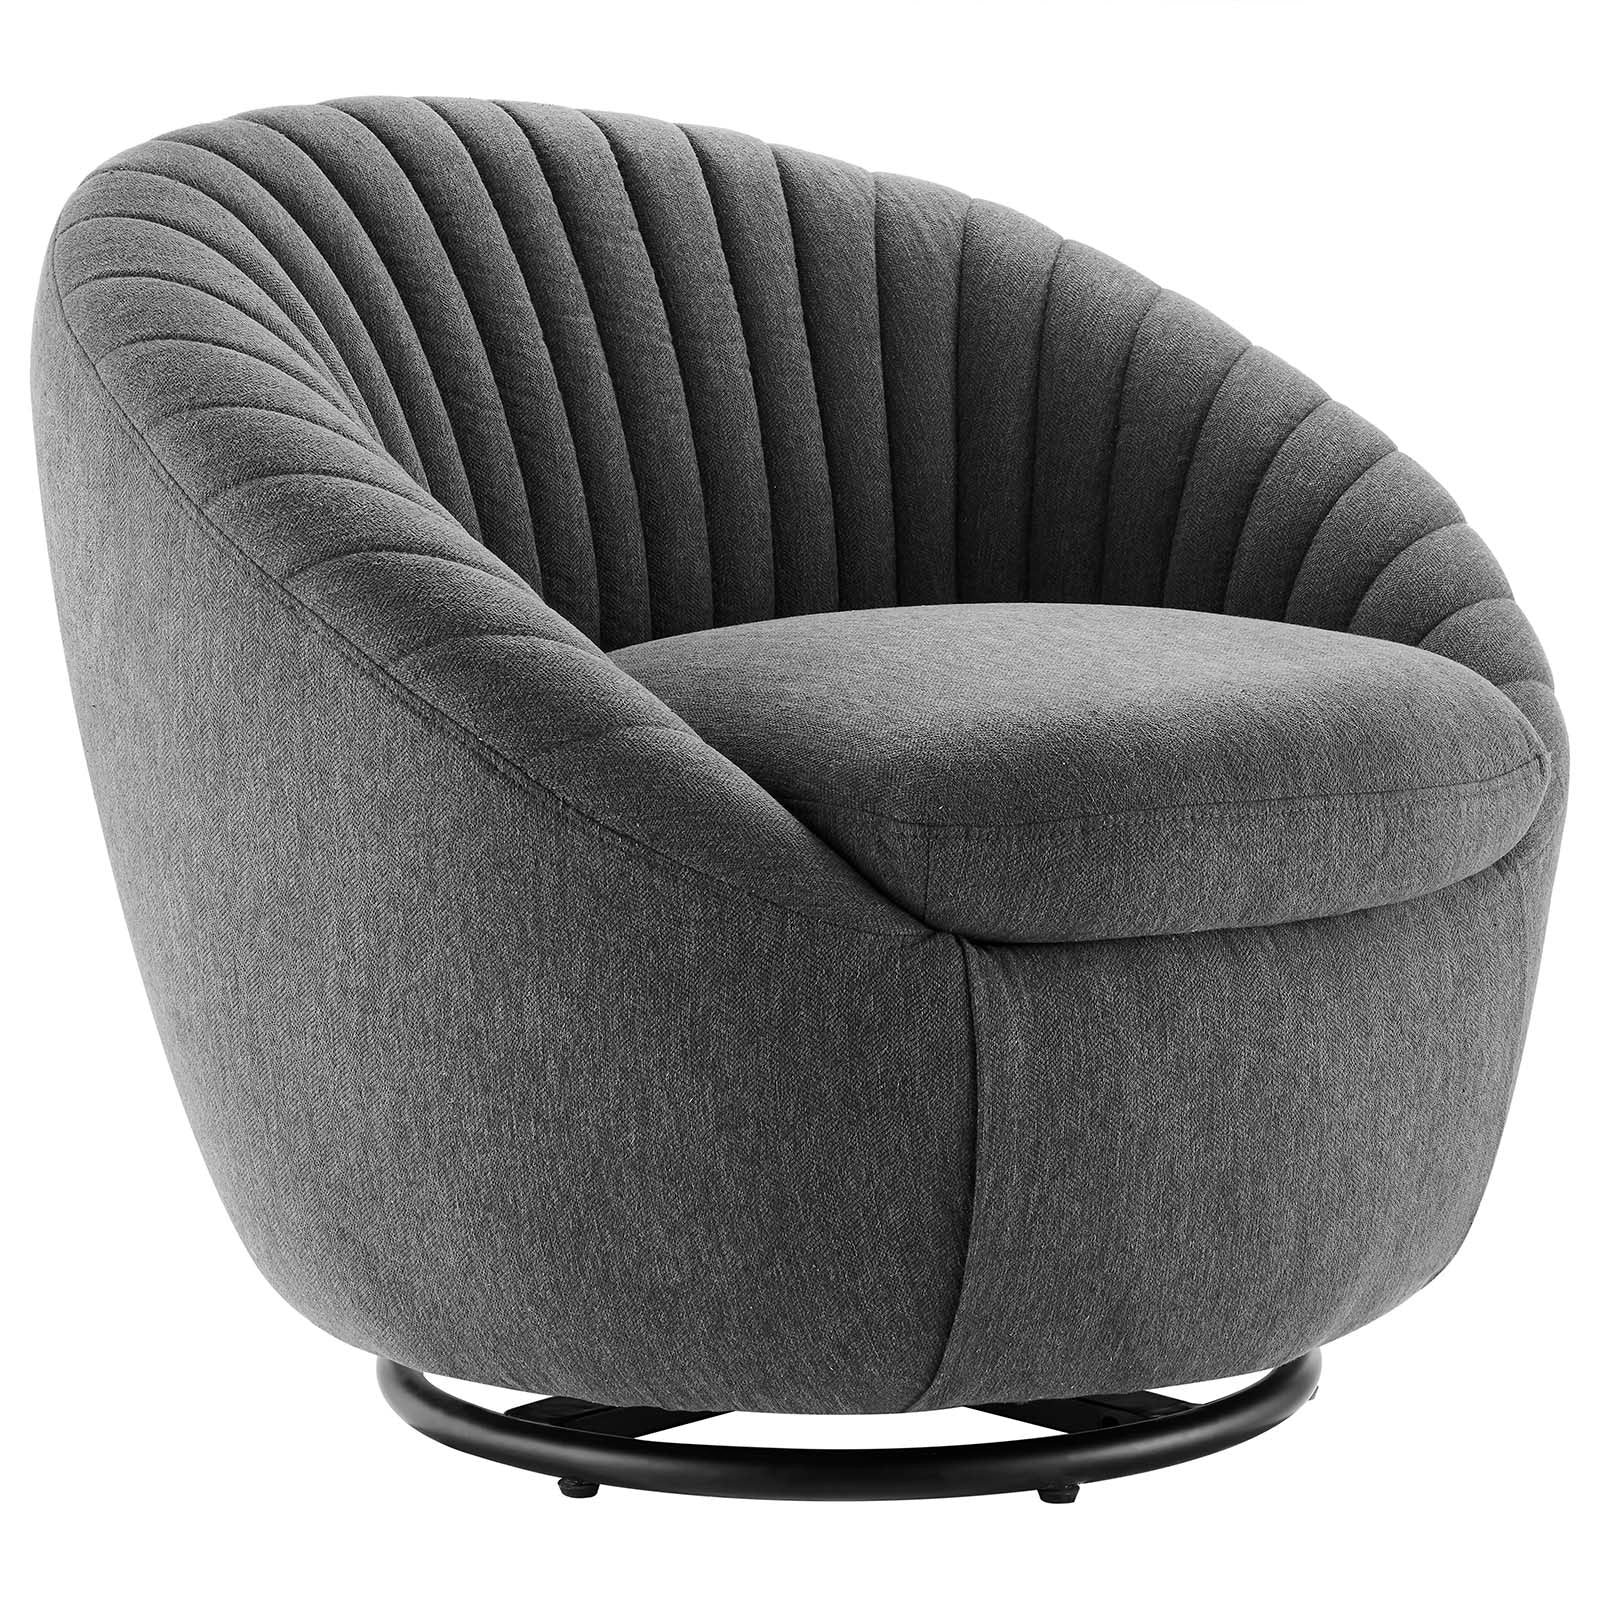 Modway Accent Chairs - Whirr Tufted Fabric Fabric Swivel Chair Black Charcoal